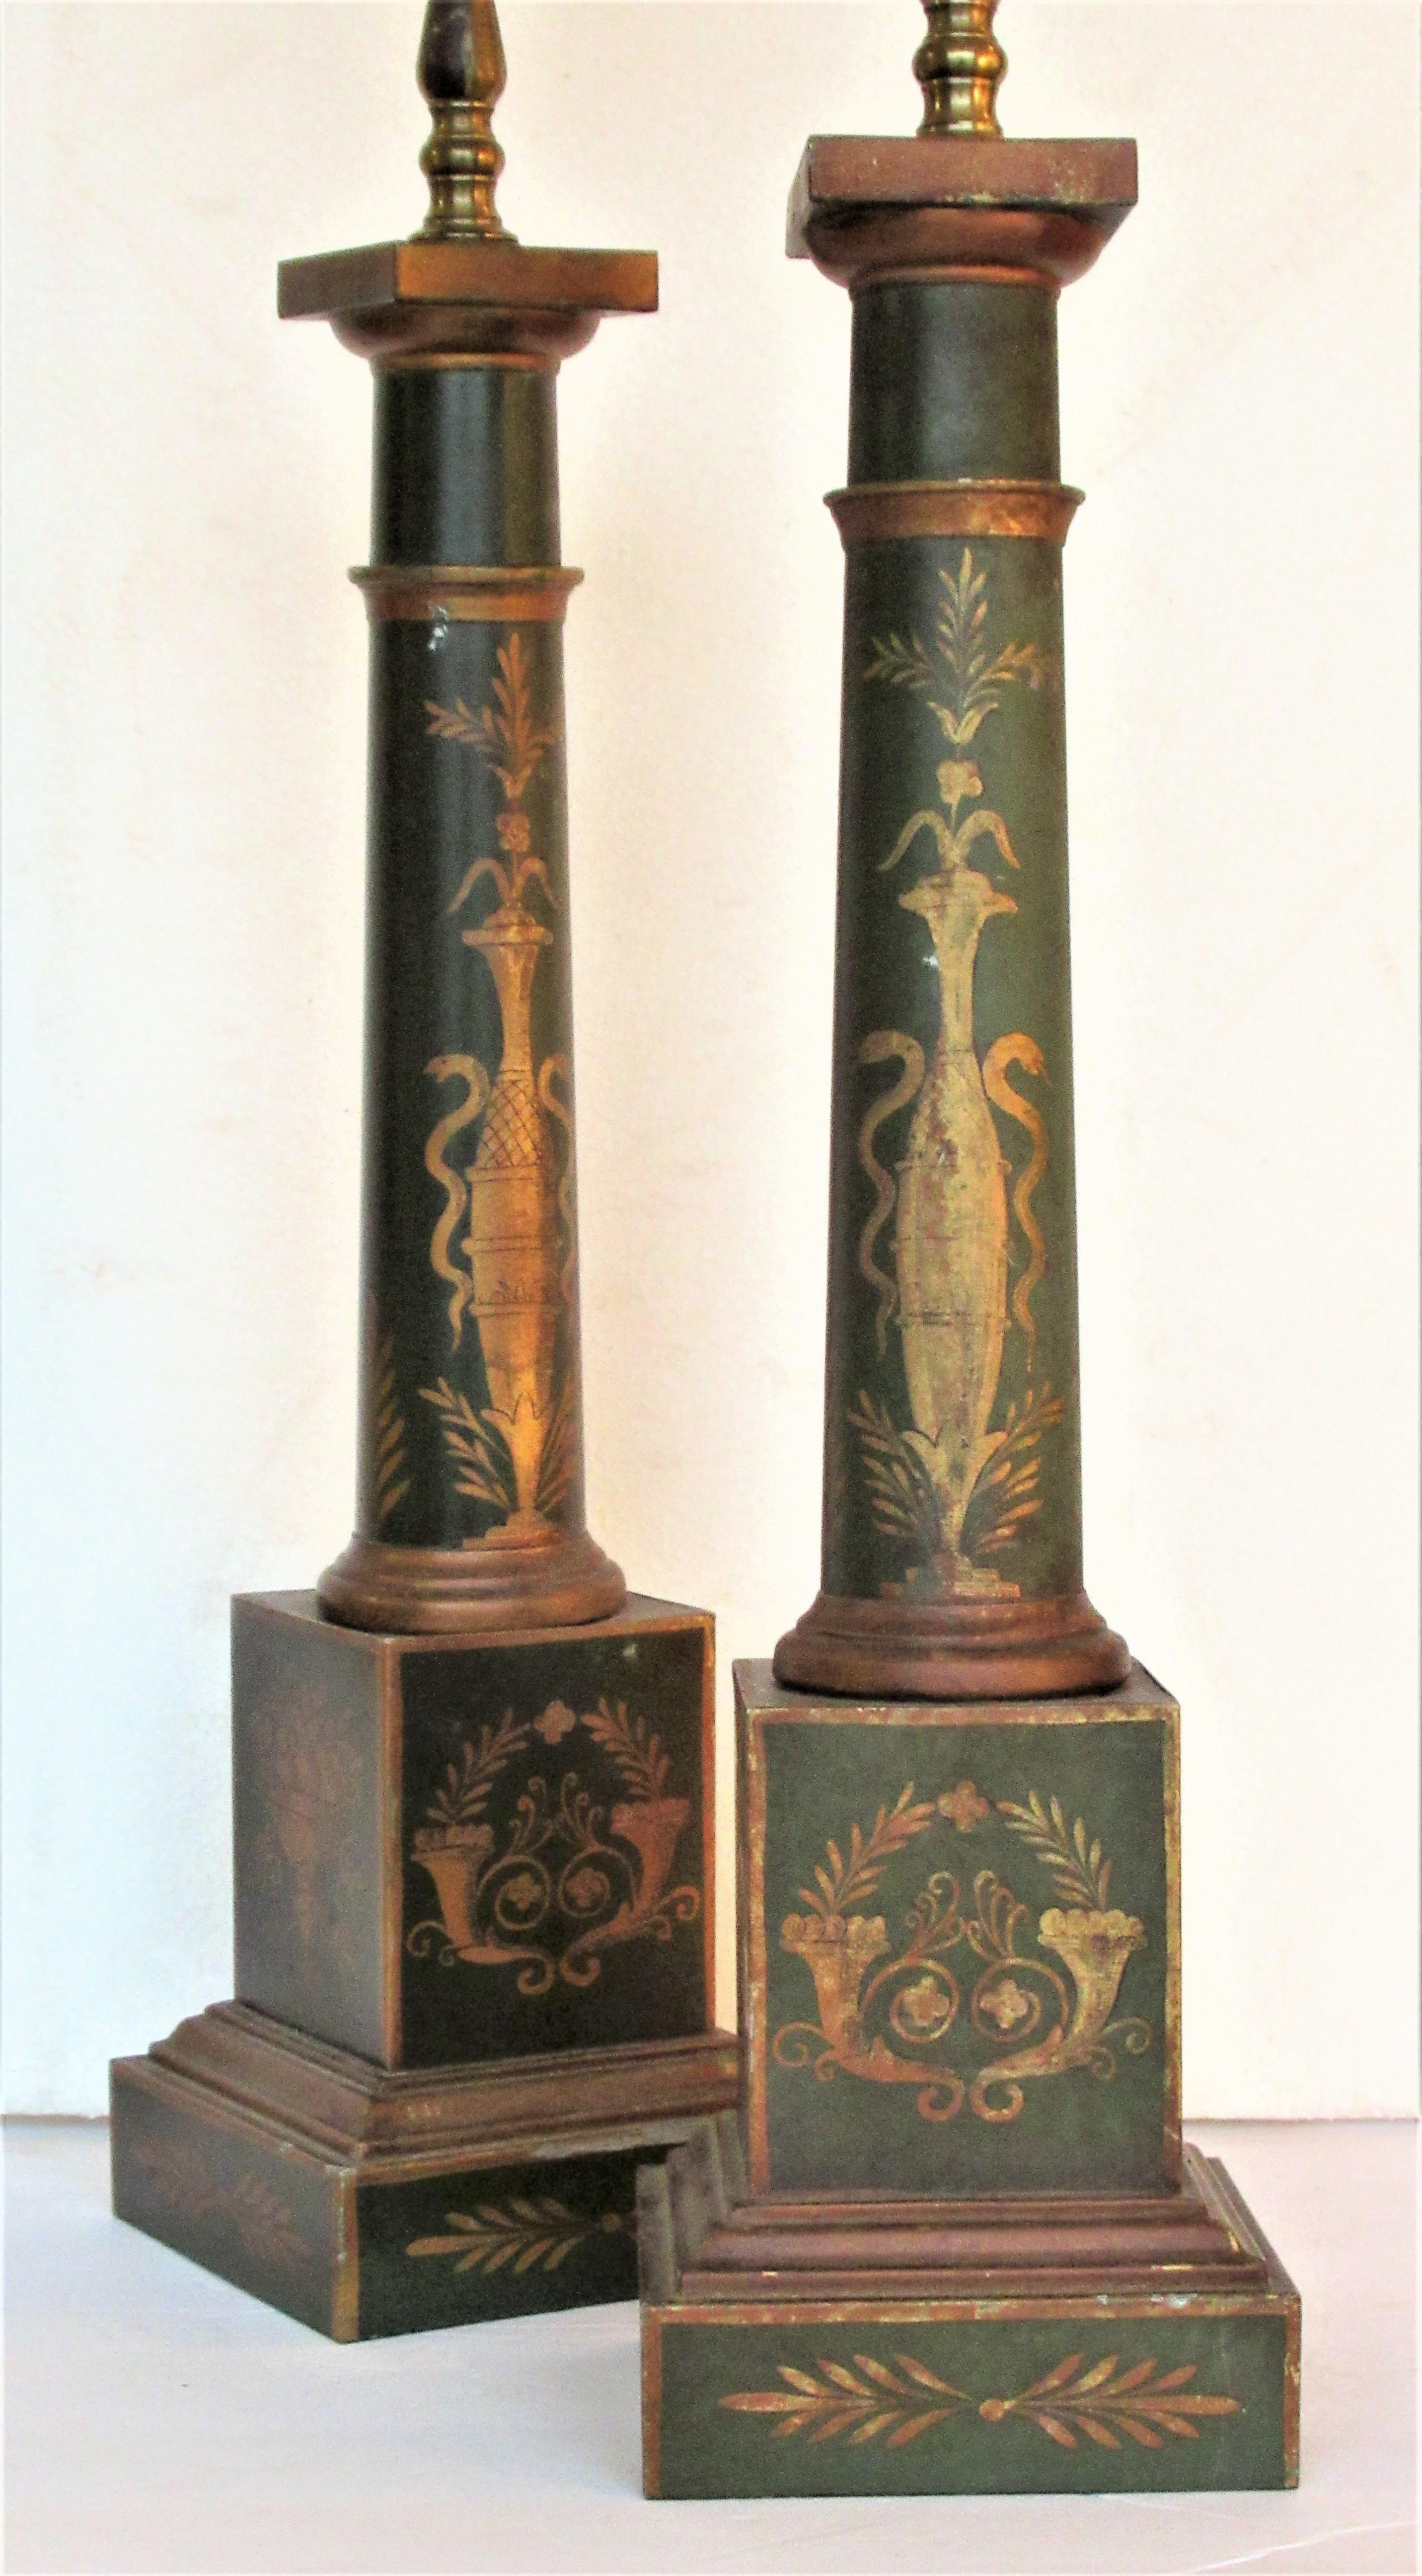 Gilt French Empire Style Tole Painted and Gilded Table Lamps